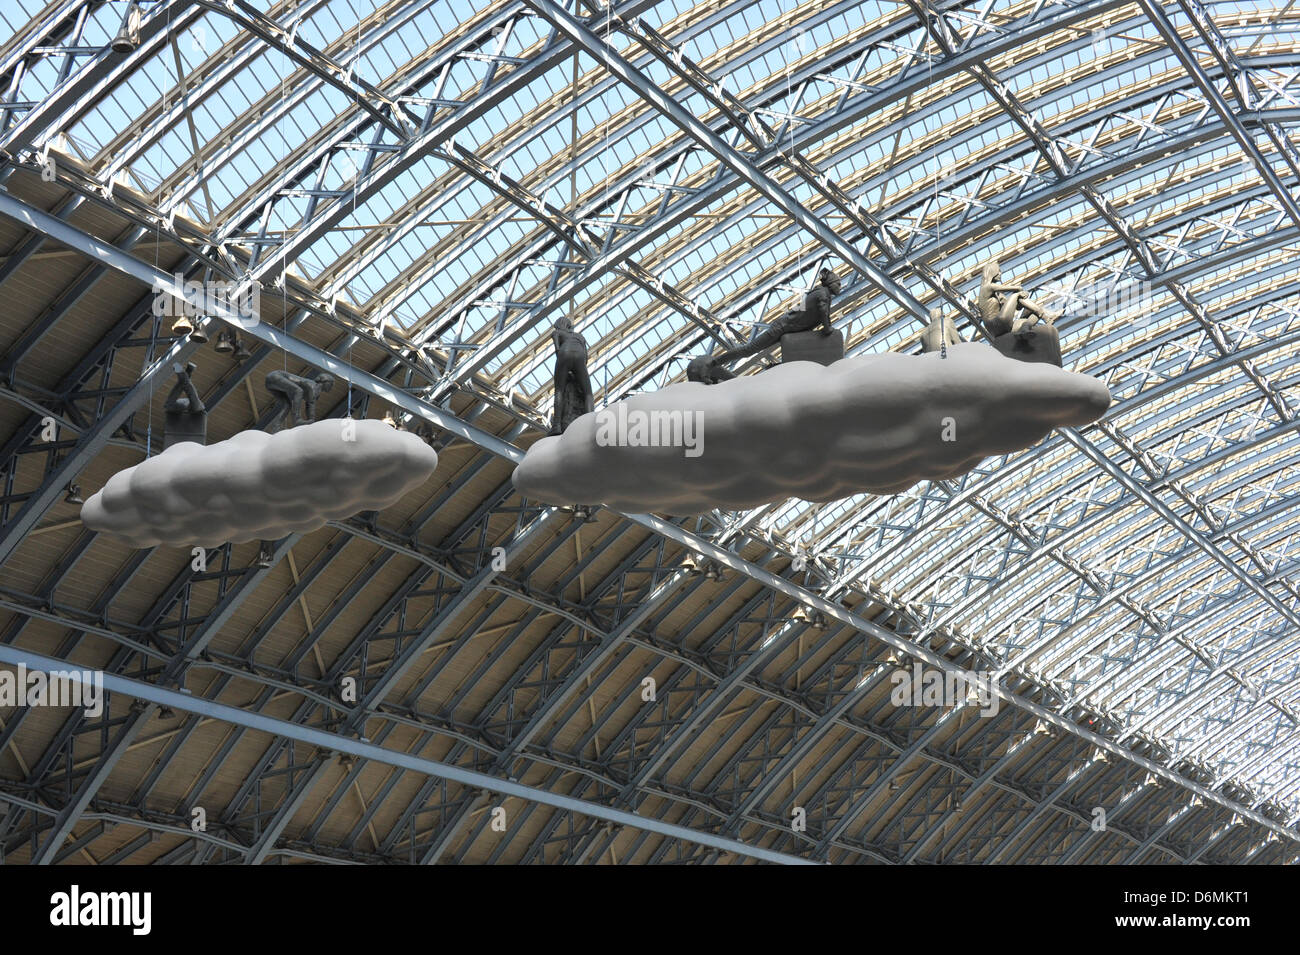 St Pancras Station, London, UK. 20th April 2013.  Cloud: Meteros. A giant 15 metre cloud installation unveiled at St Pancras International station in London. The work, created by husband and wife team Lucy and Jorge Orta, has been placed above the station's Grand Terrace. Cloud: Meteoros is the first artwork in a series of 'Terrace Wires' pieces commissioned by HS1 Ltd for the space - which was home to the Olympic rings last summer. Credit: Matthew Chattle/Alamy Live News Stock Photo